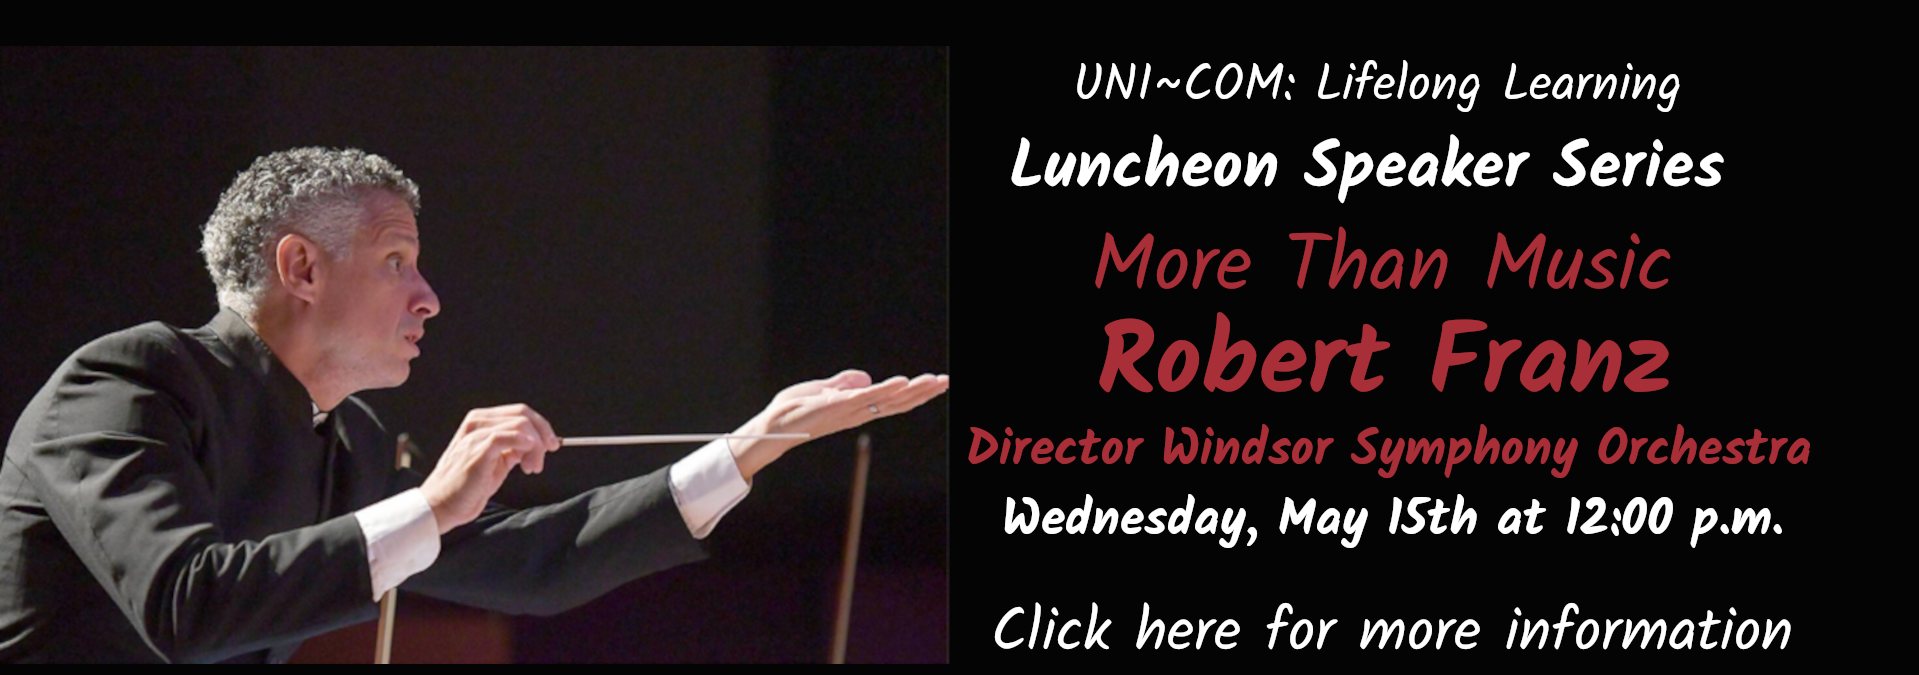 Luncheon Lecture Series - Robert Franz, WSO. Click on image for more information.